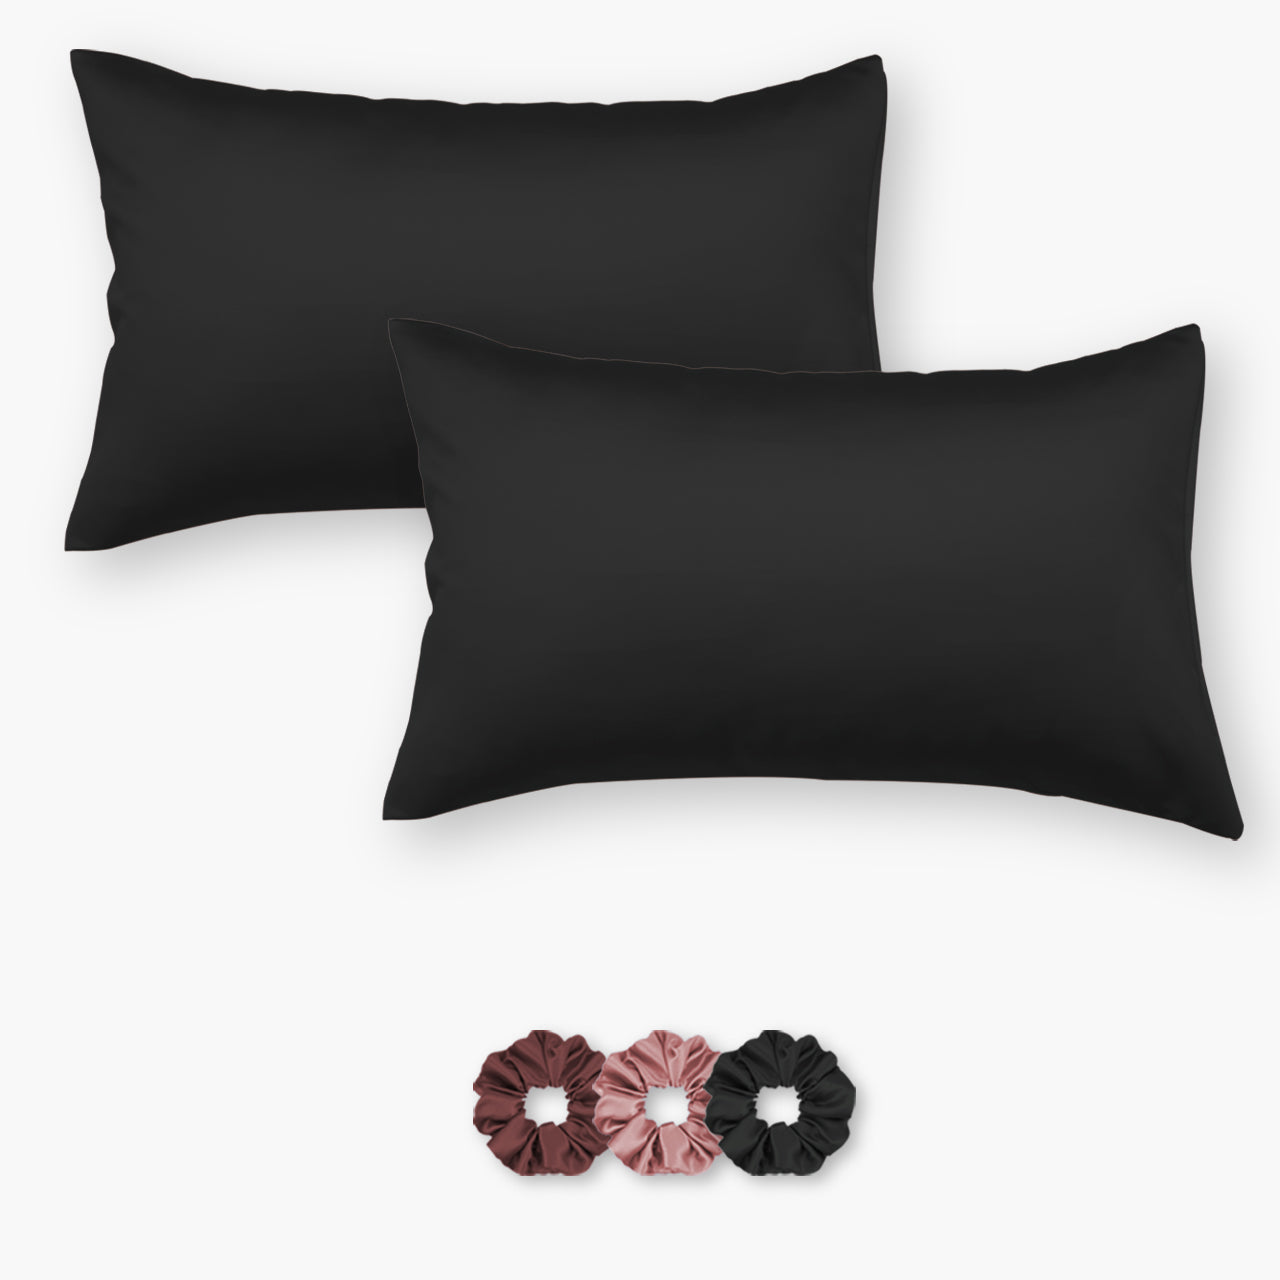 Black Satin Pillow Covers - Set of 2 (With 3 Free Scrunchies)